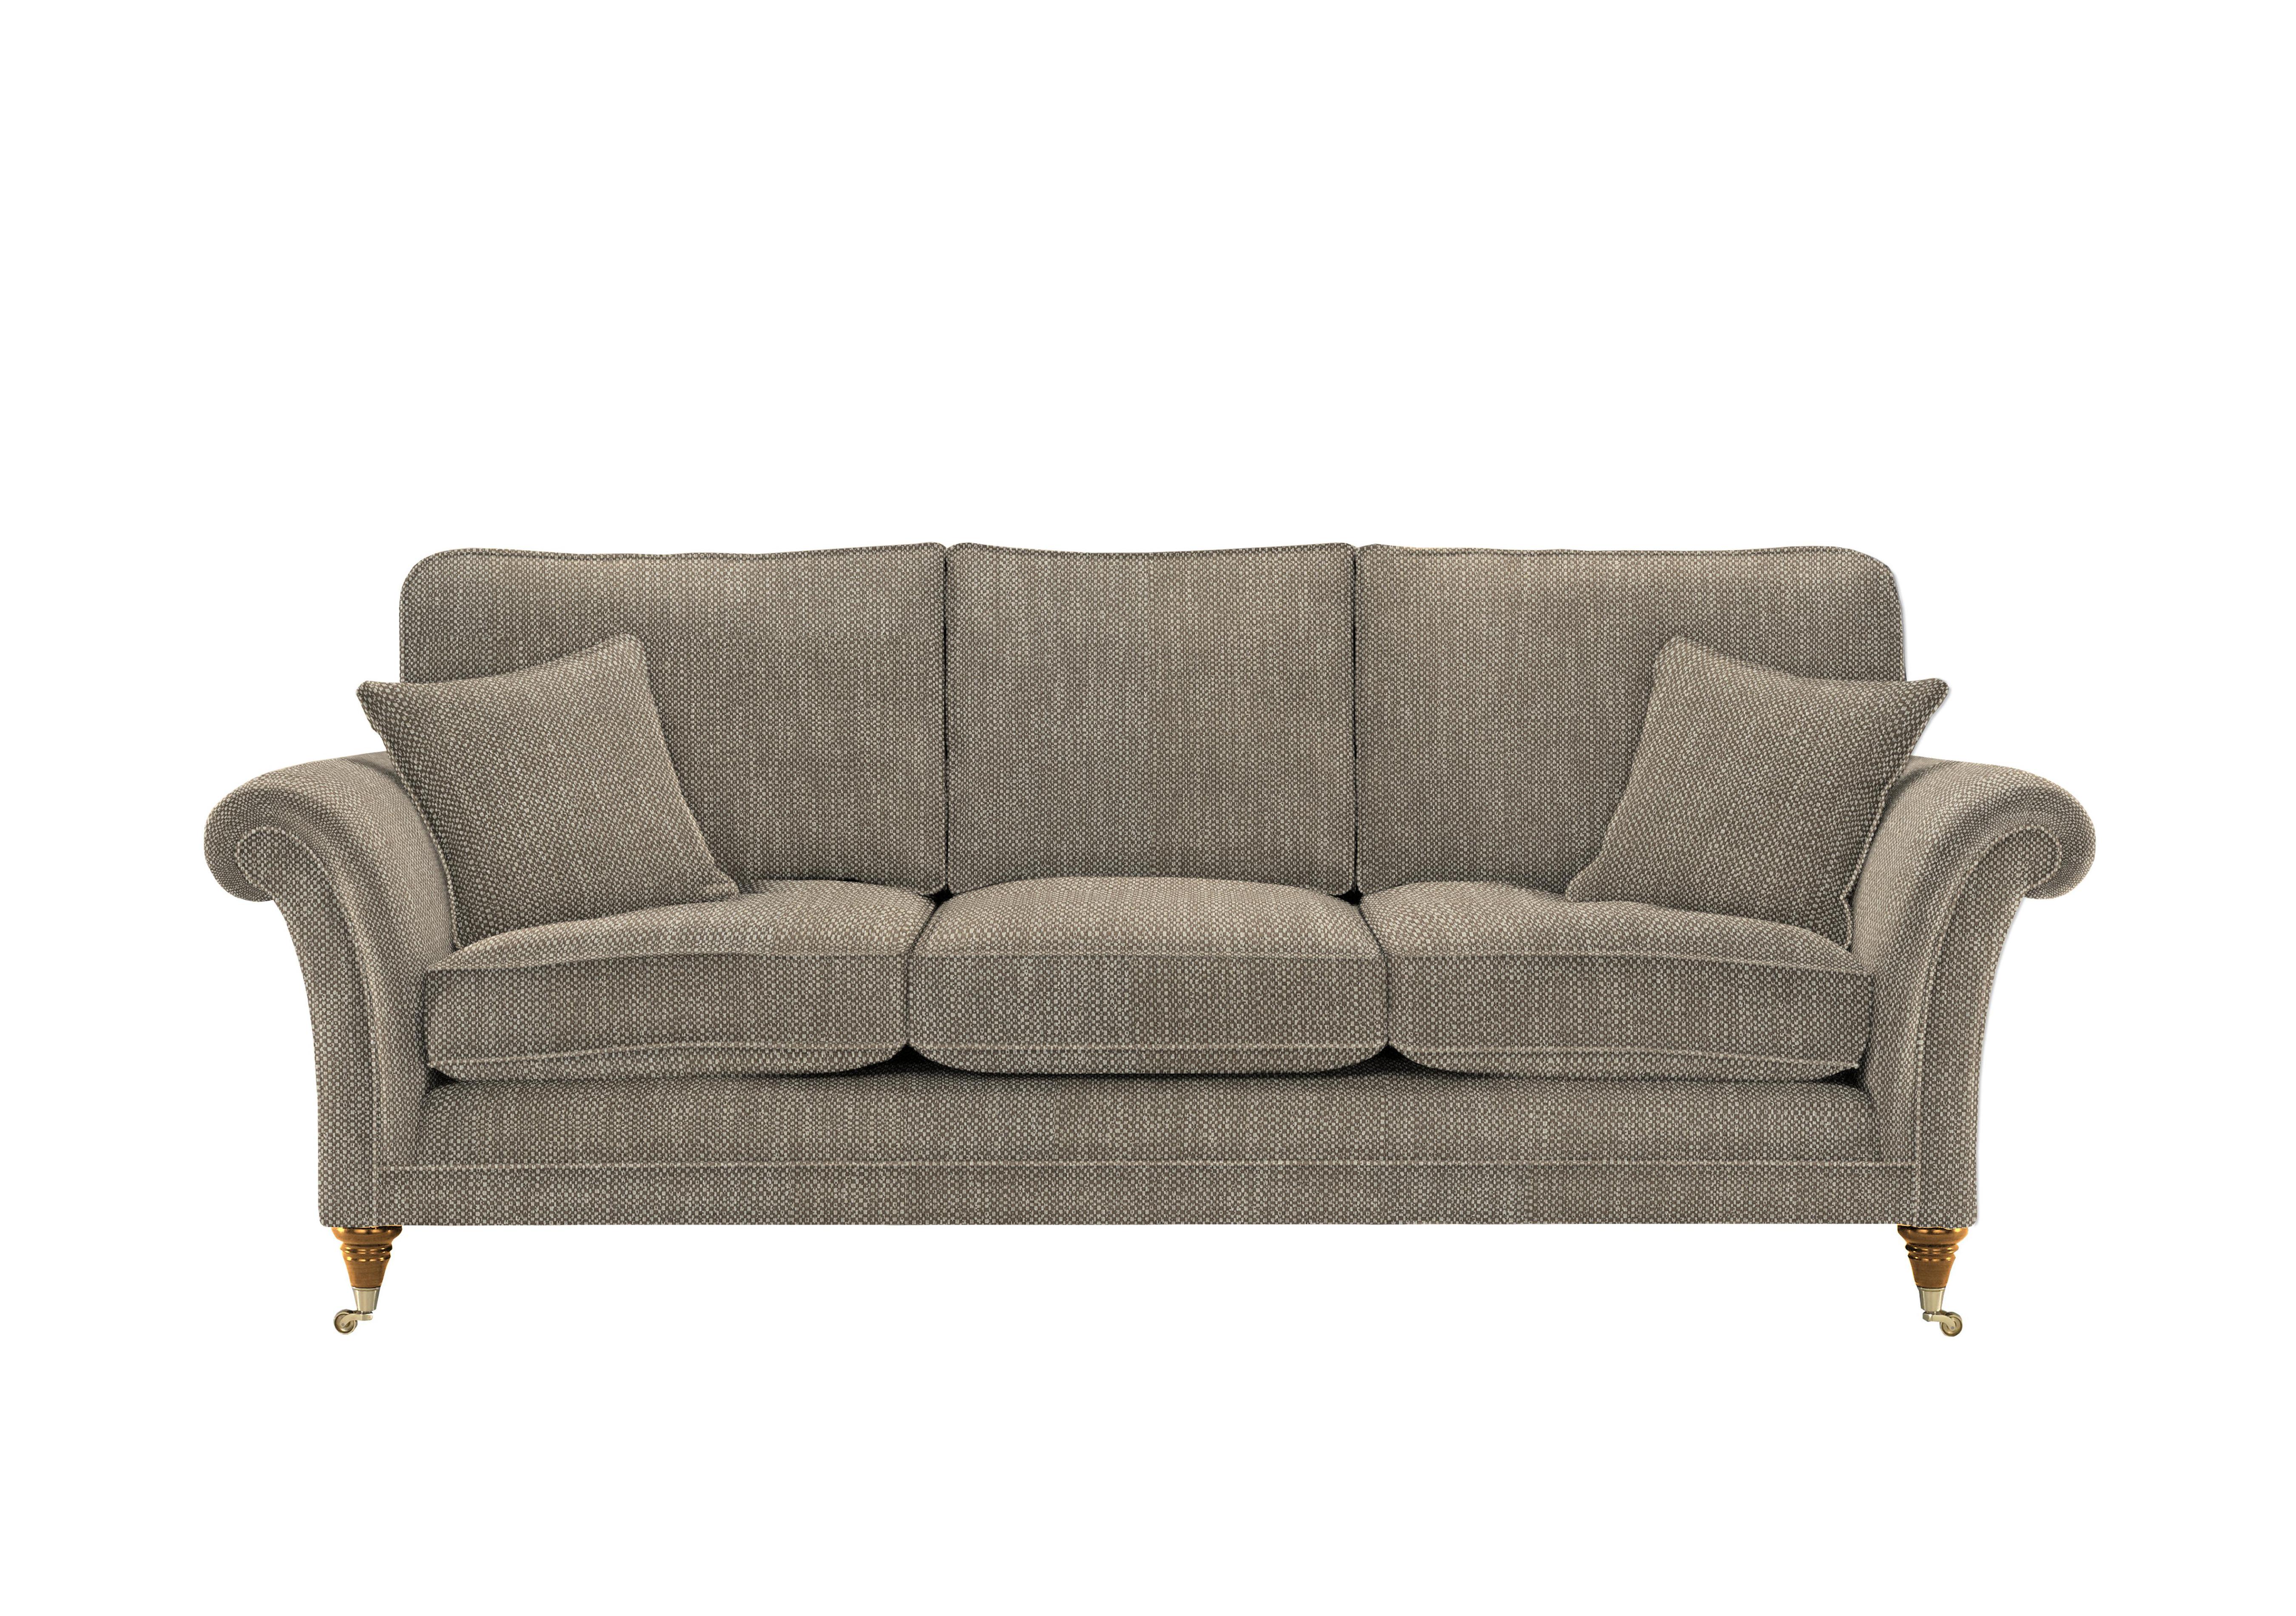 Burghley Grand 3 Seater Sofa in 001477-0025 Metric Sable on Furniture Village